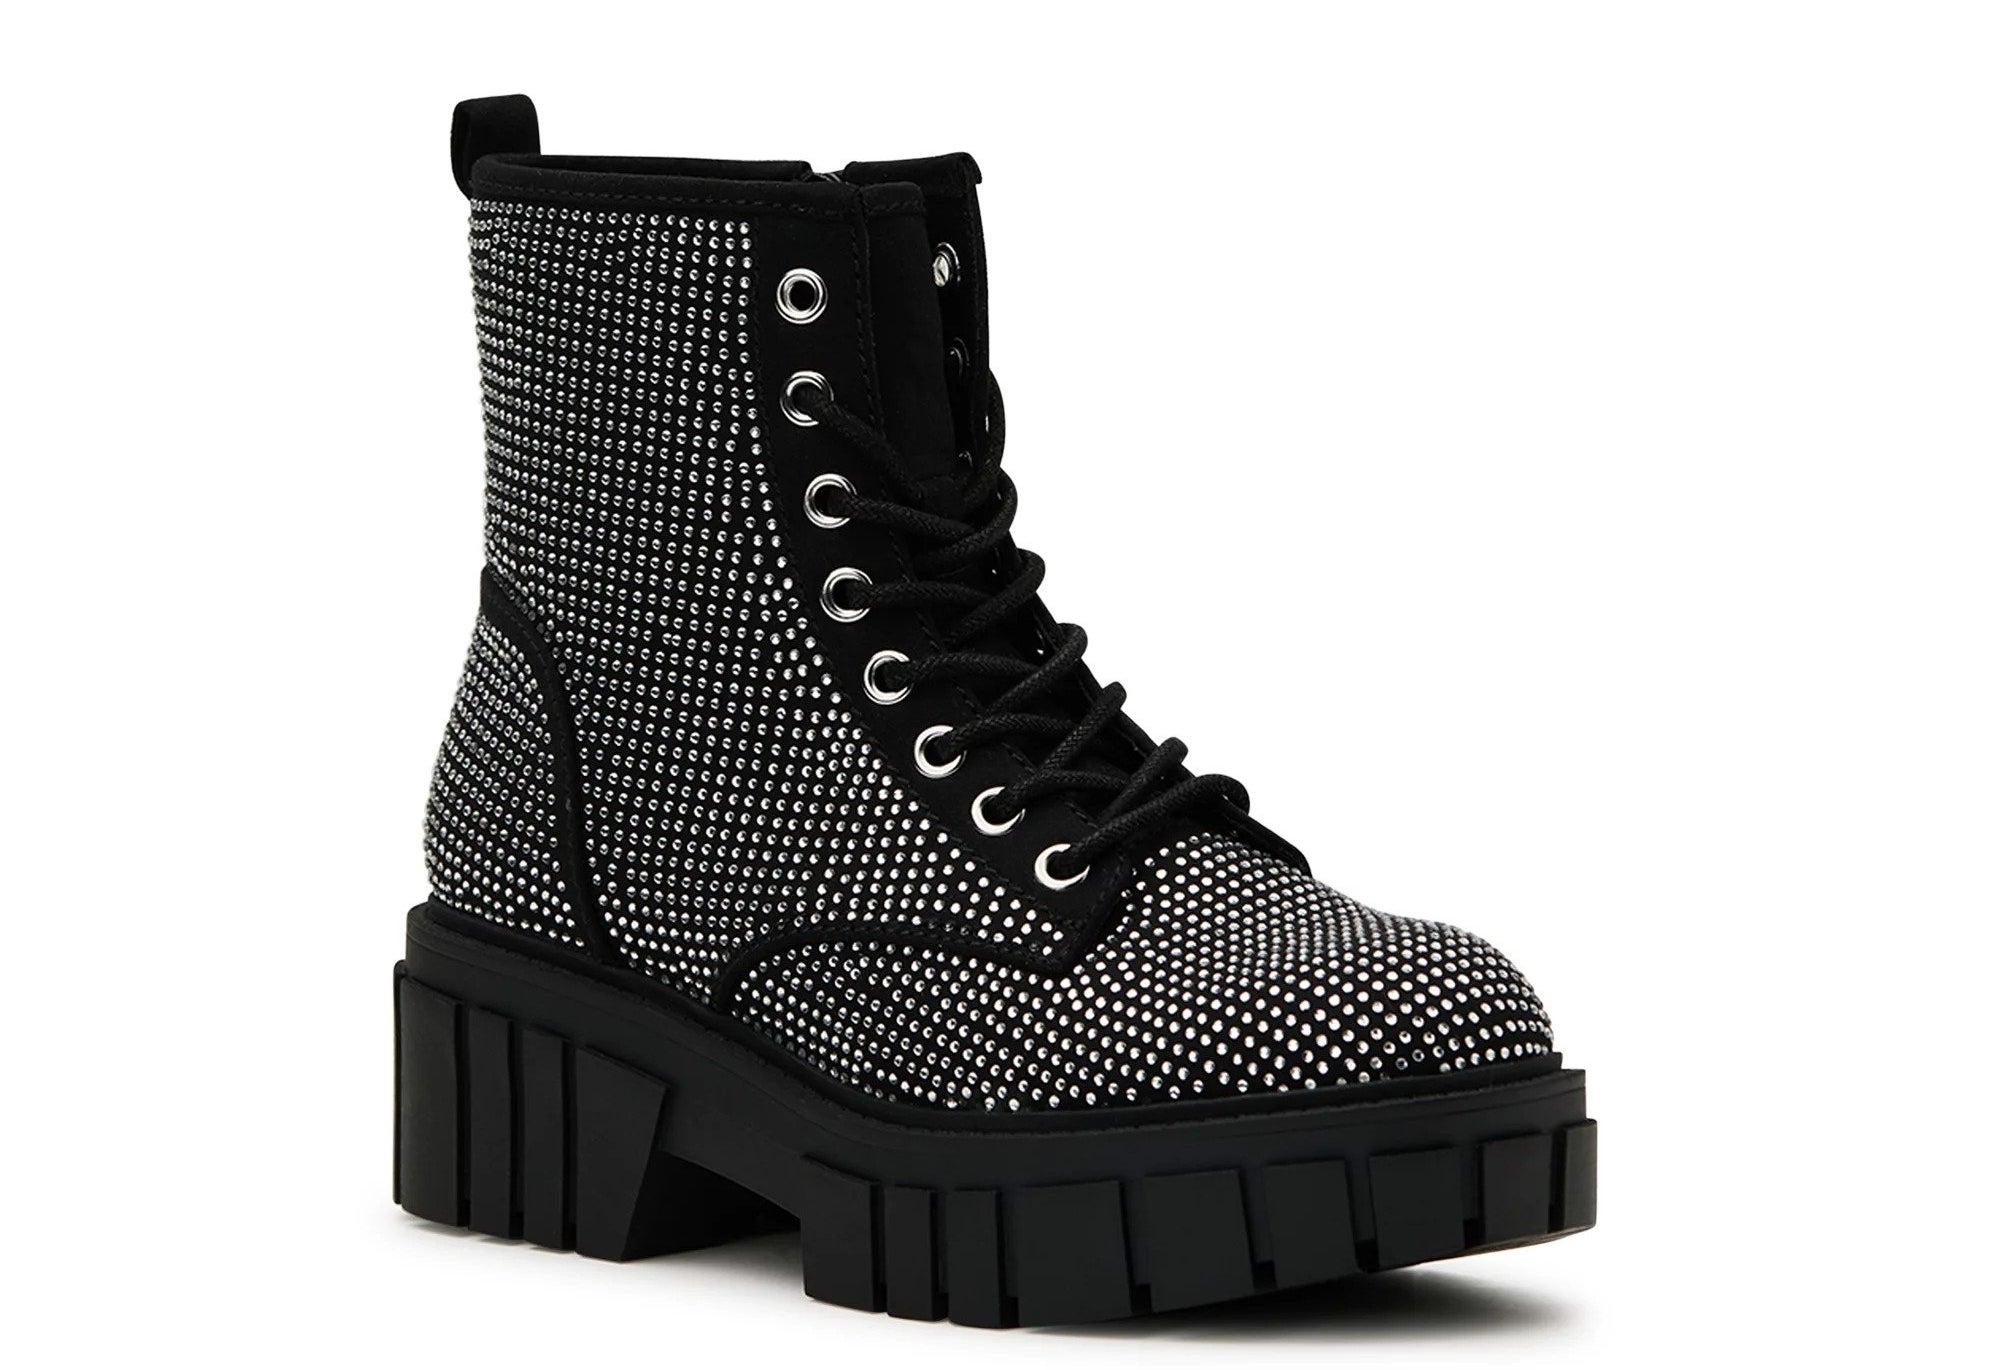 The black lace-up boot with a chunky sole